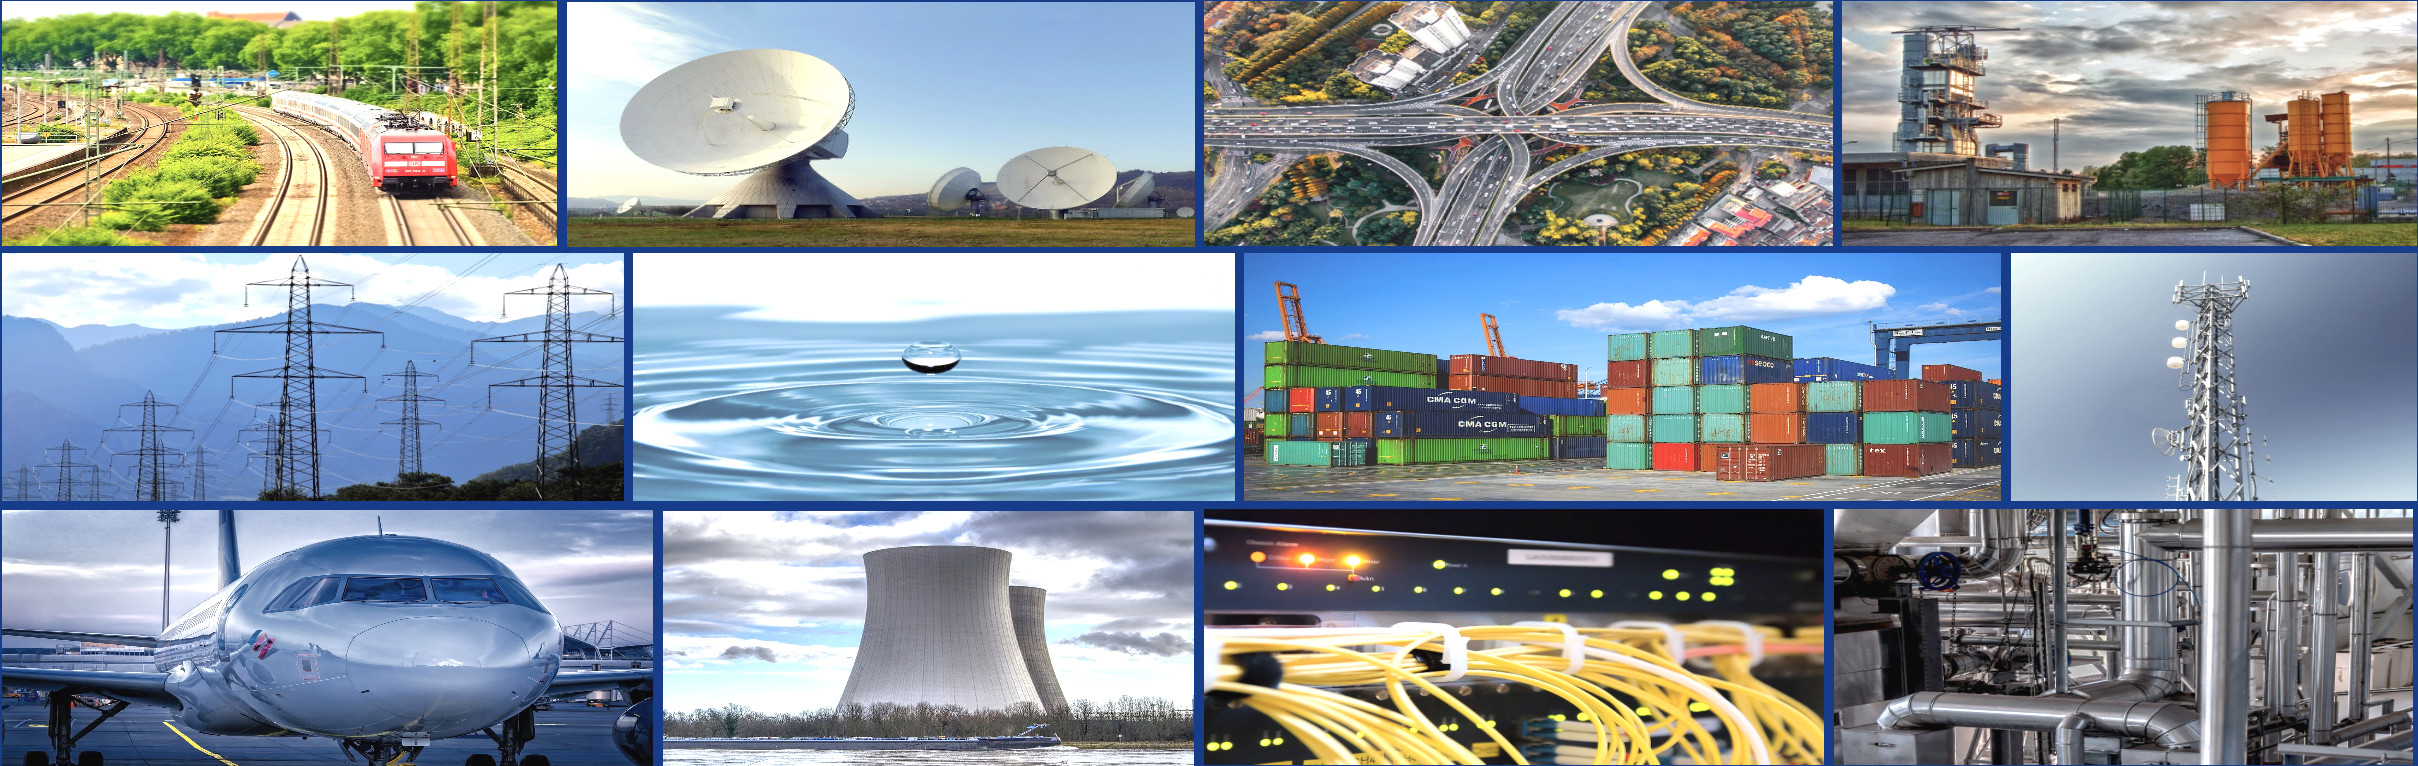 banner for: Critical Infrastructure Resilience Newsletter